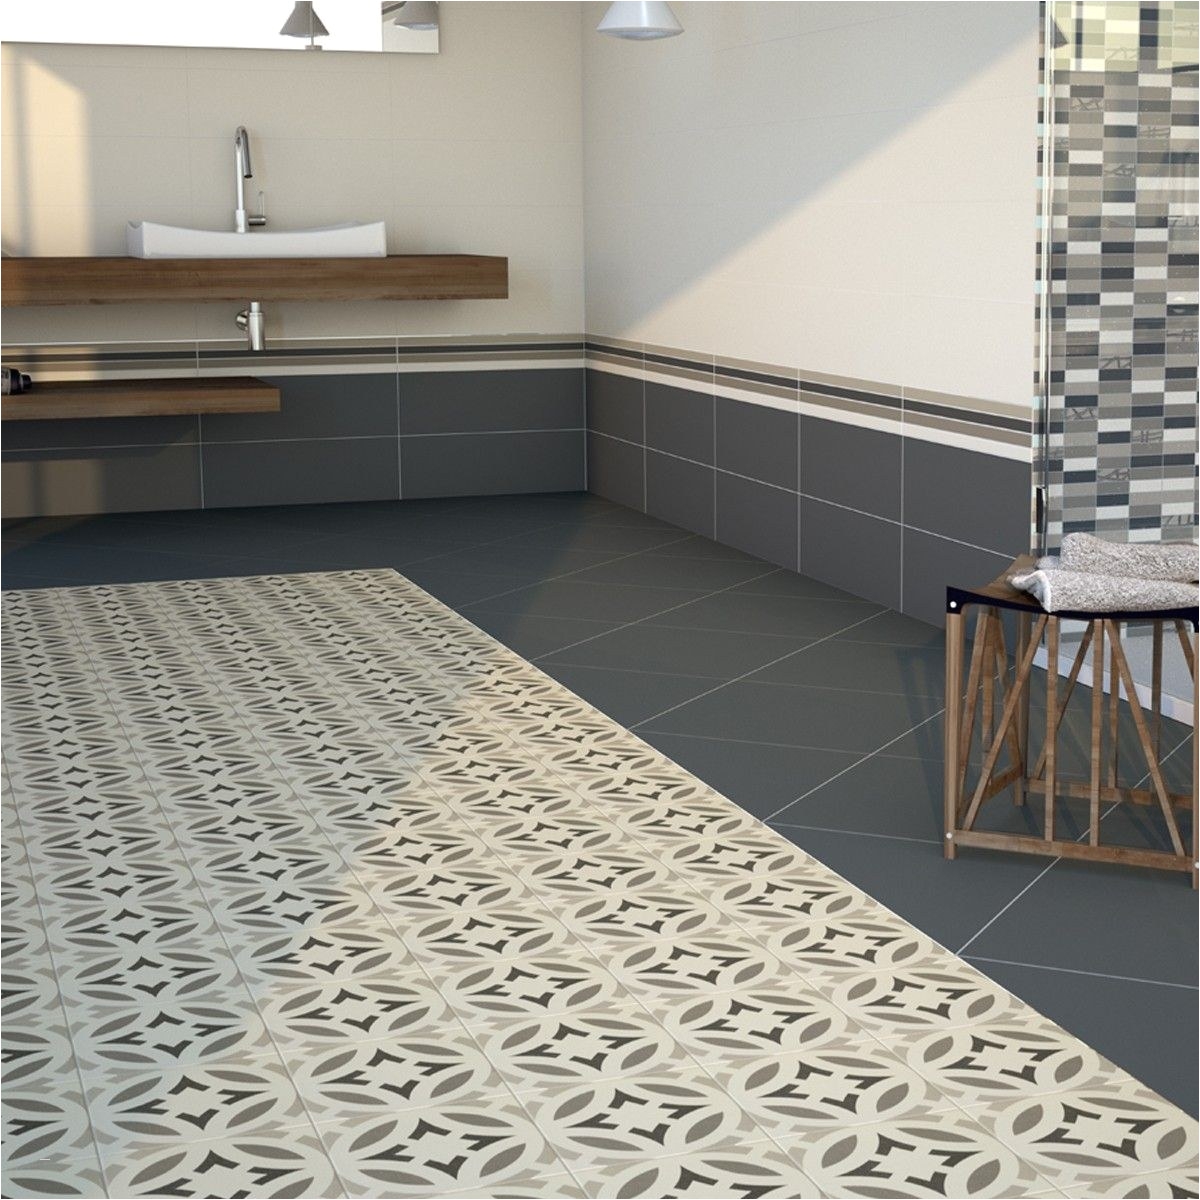 range of ceramic patterned floor tiles from tile choice with next day delivery discounts on the